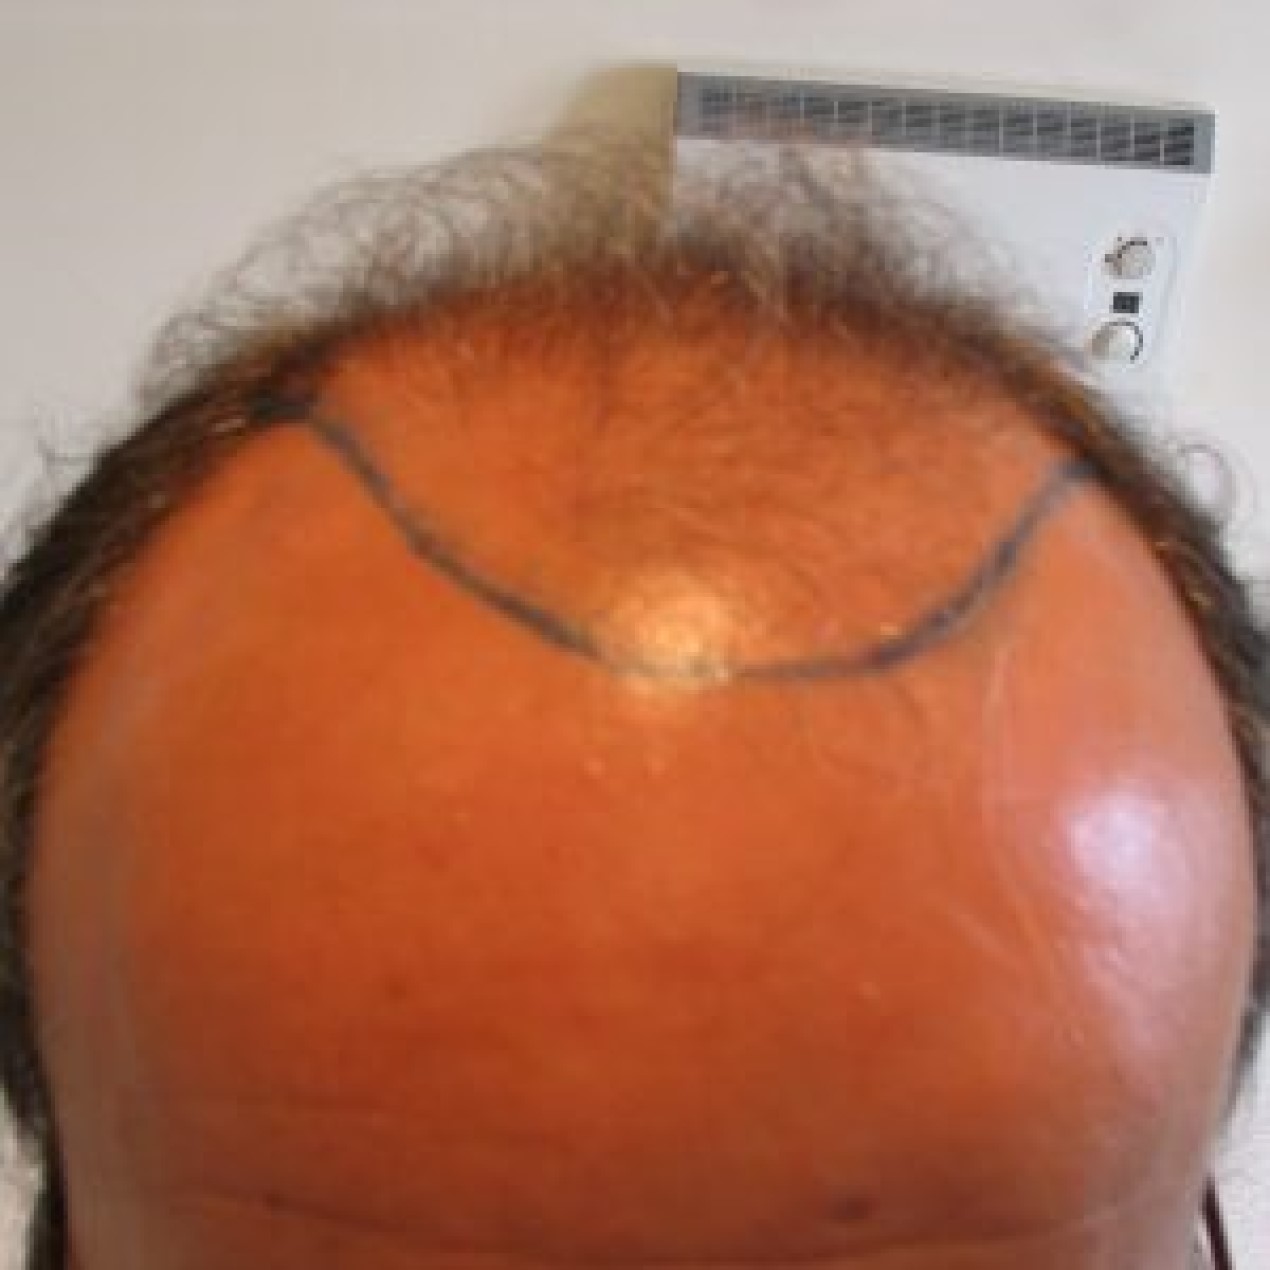 Hair Transplant After 3 Months: Photos, Results, Side Effects, Wimpole Clinic